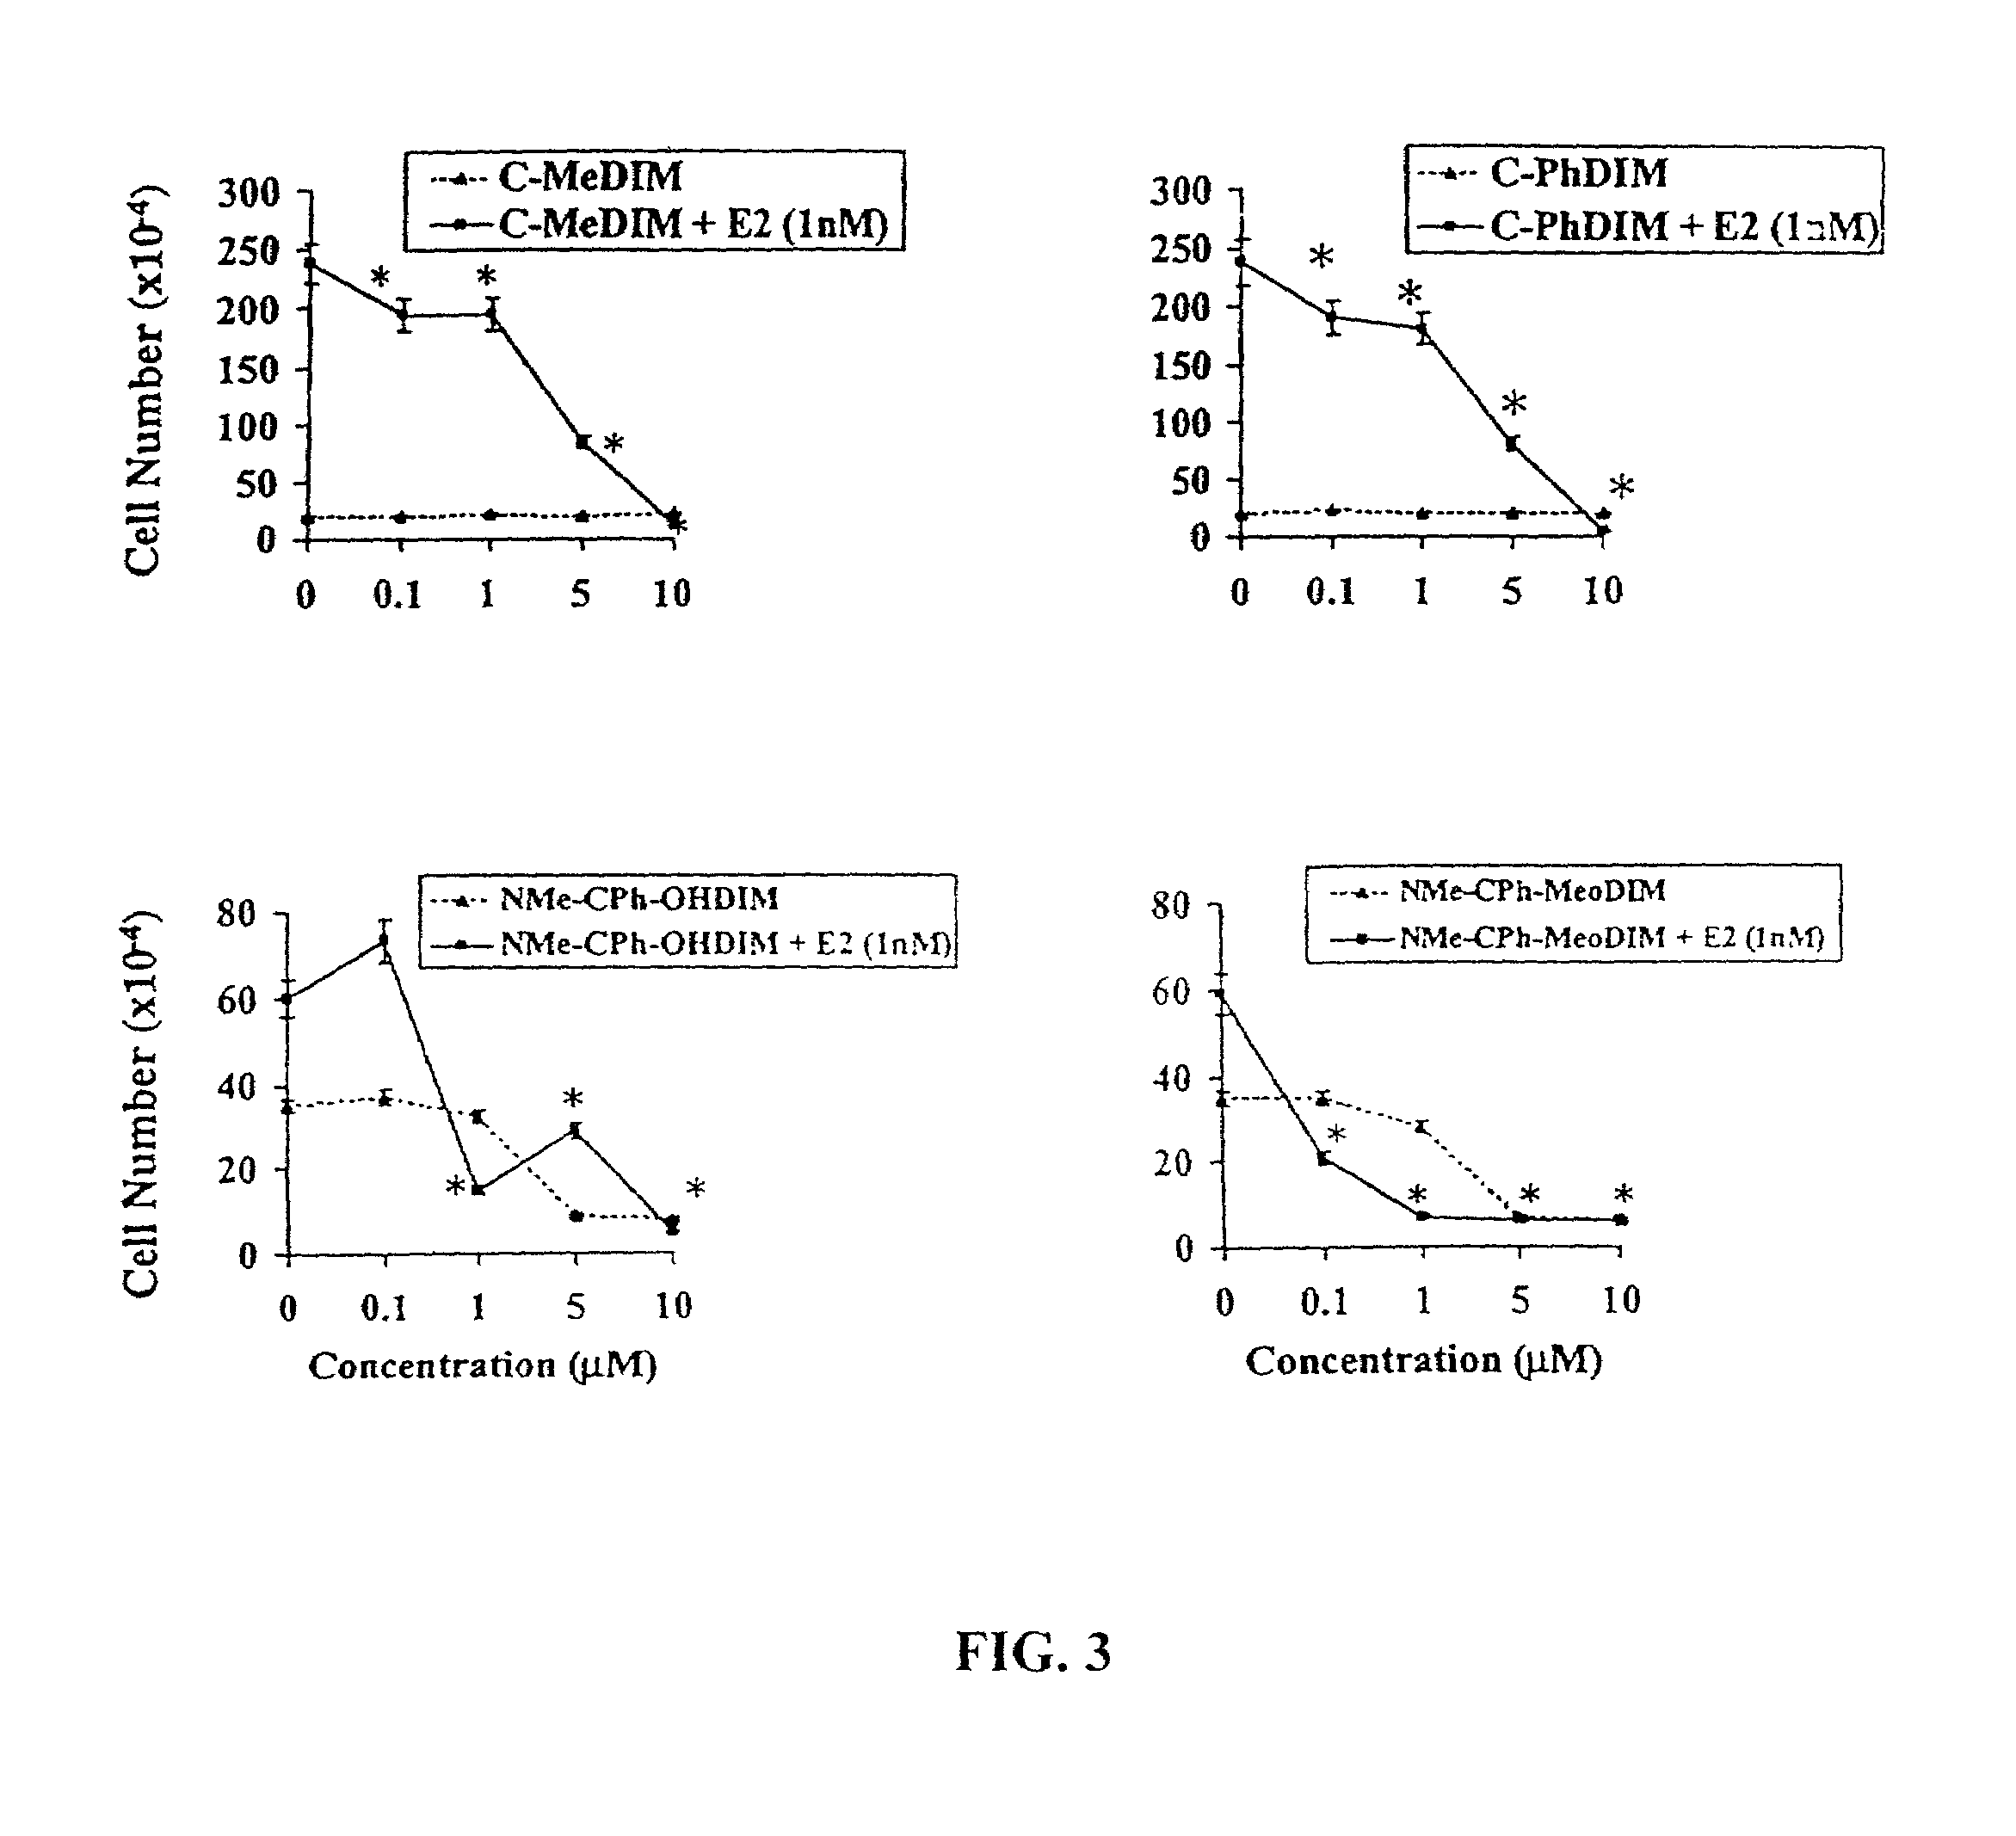 Diindolylmethane and C-substituted diindolylmethane compositions and methods for the treatment of multiple cancers